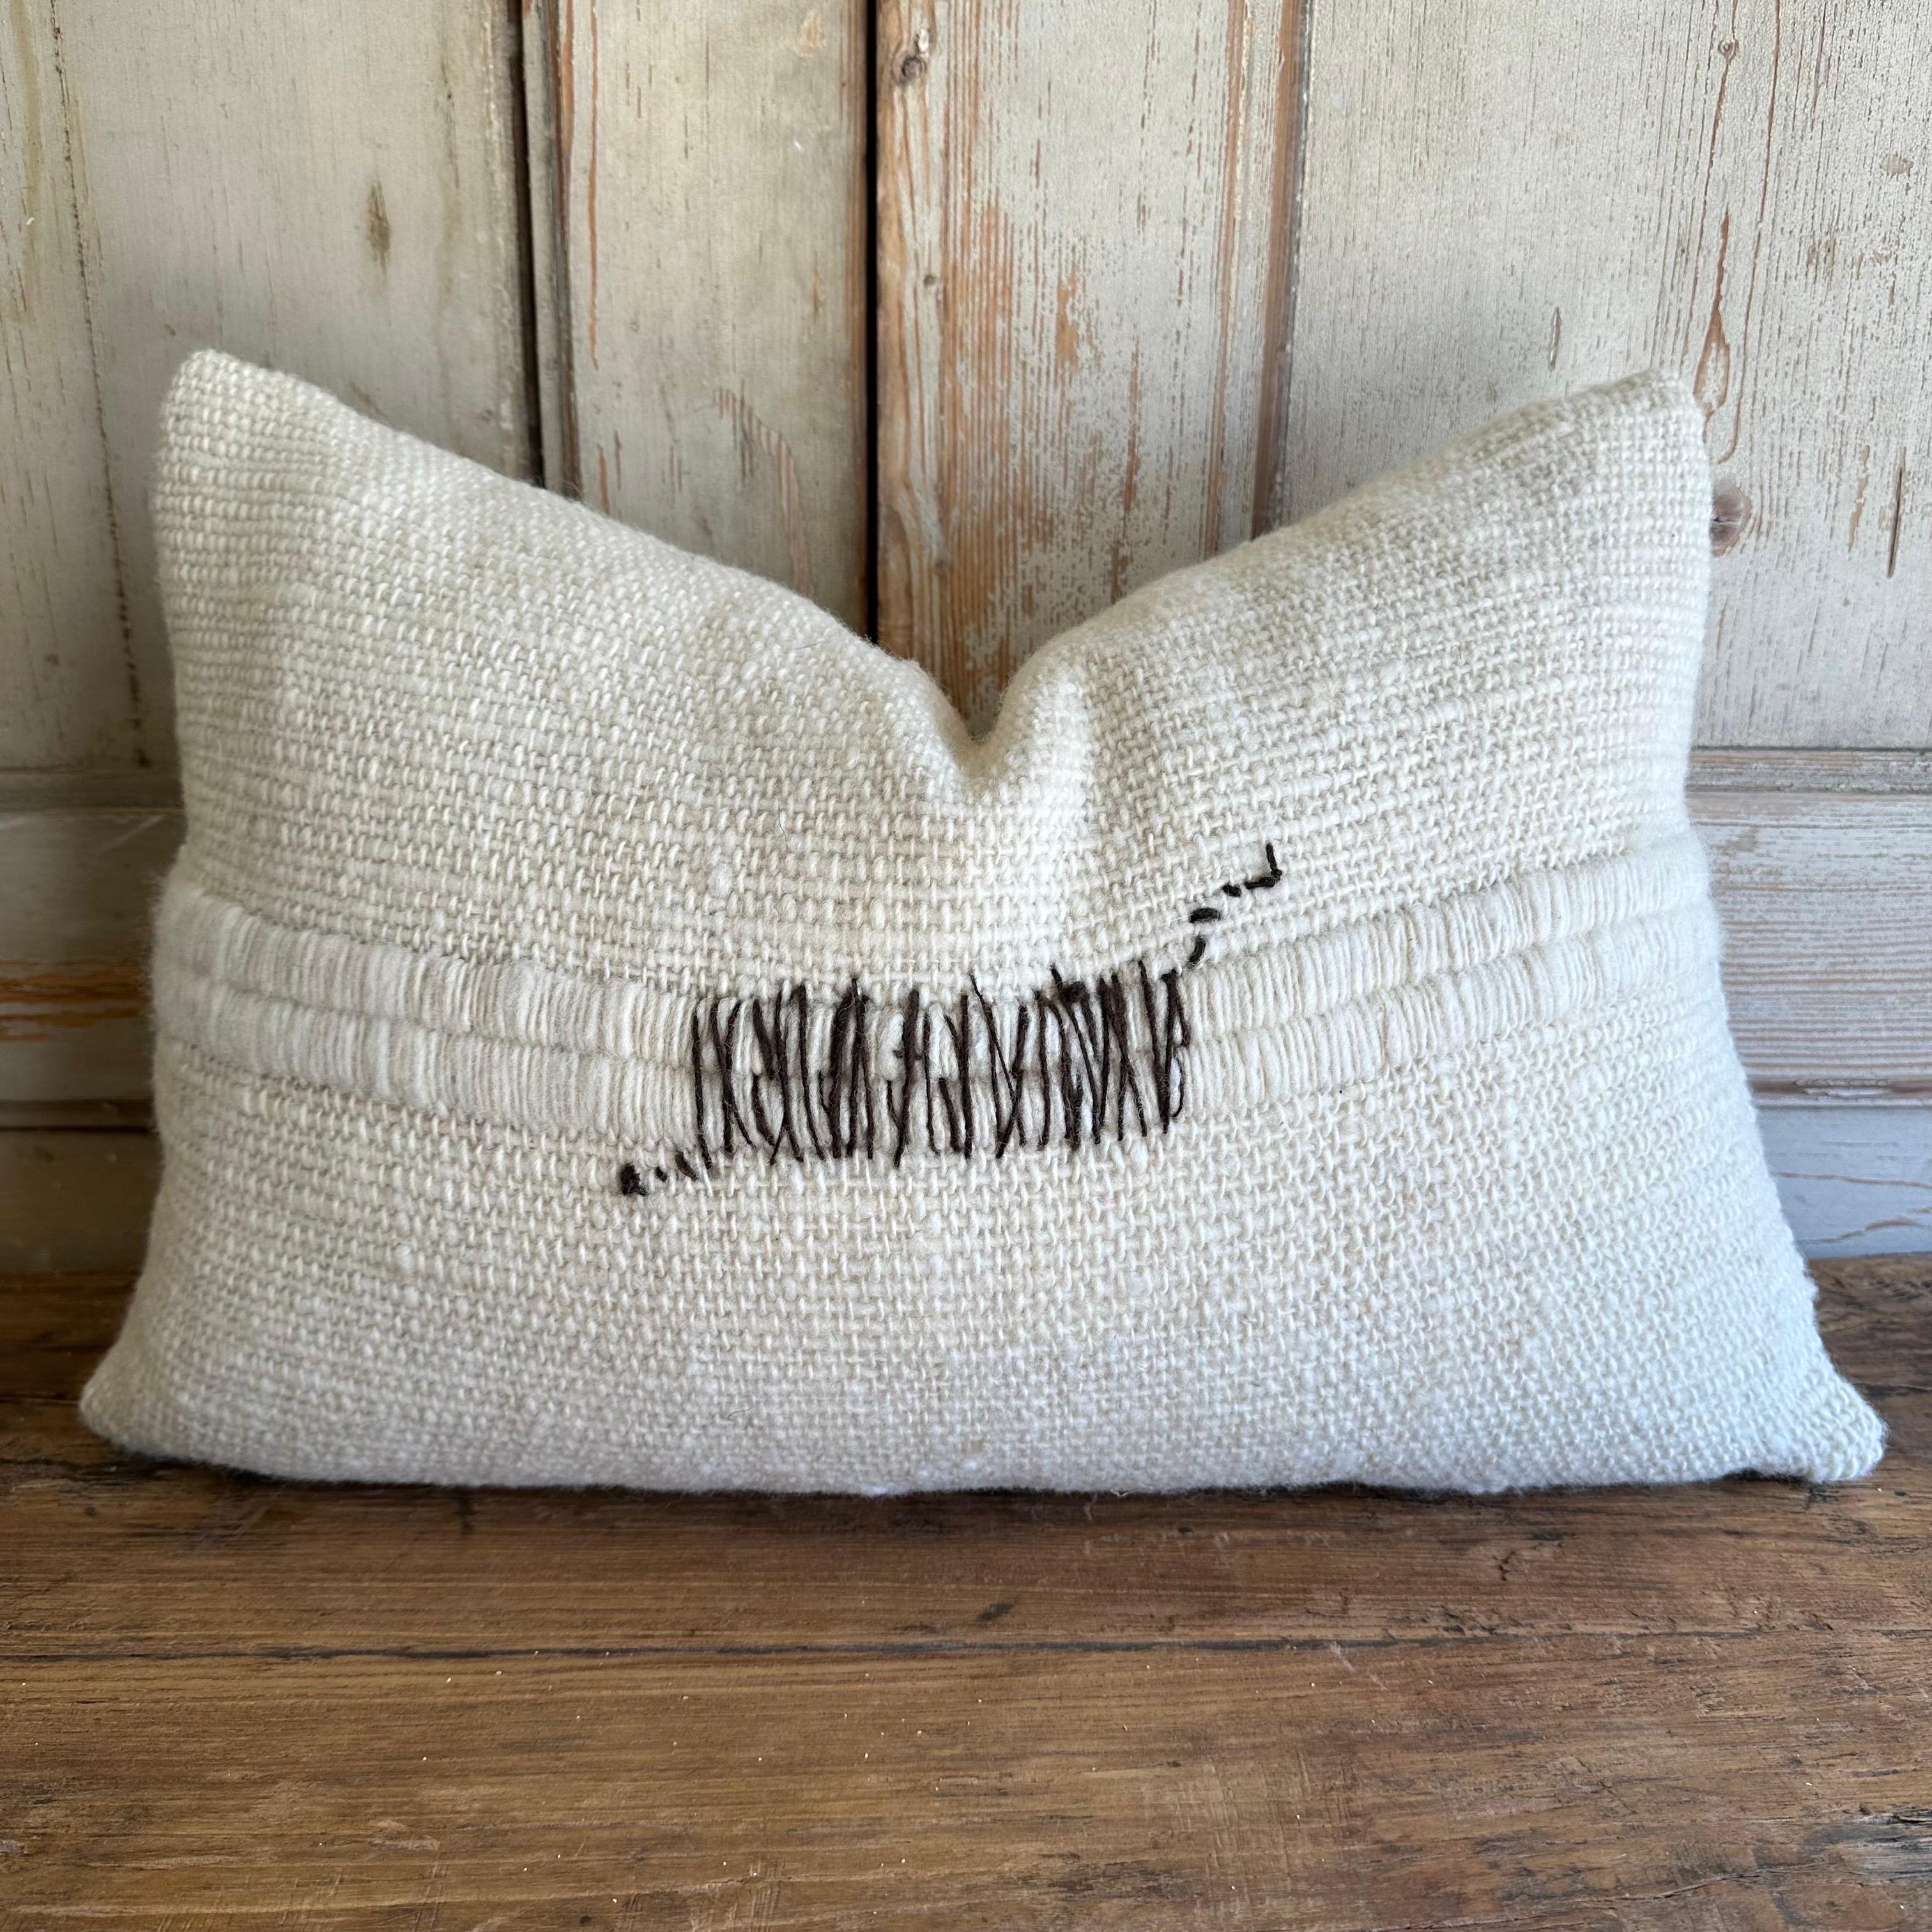 Contemporary Nikko Hand Made Wool Pillow with Zig Zag Stitching